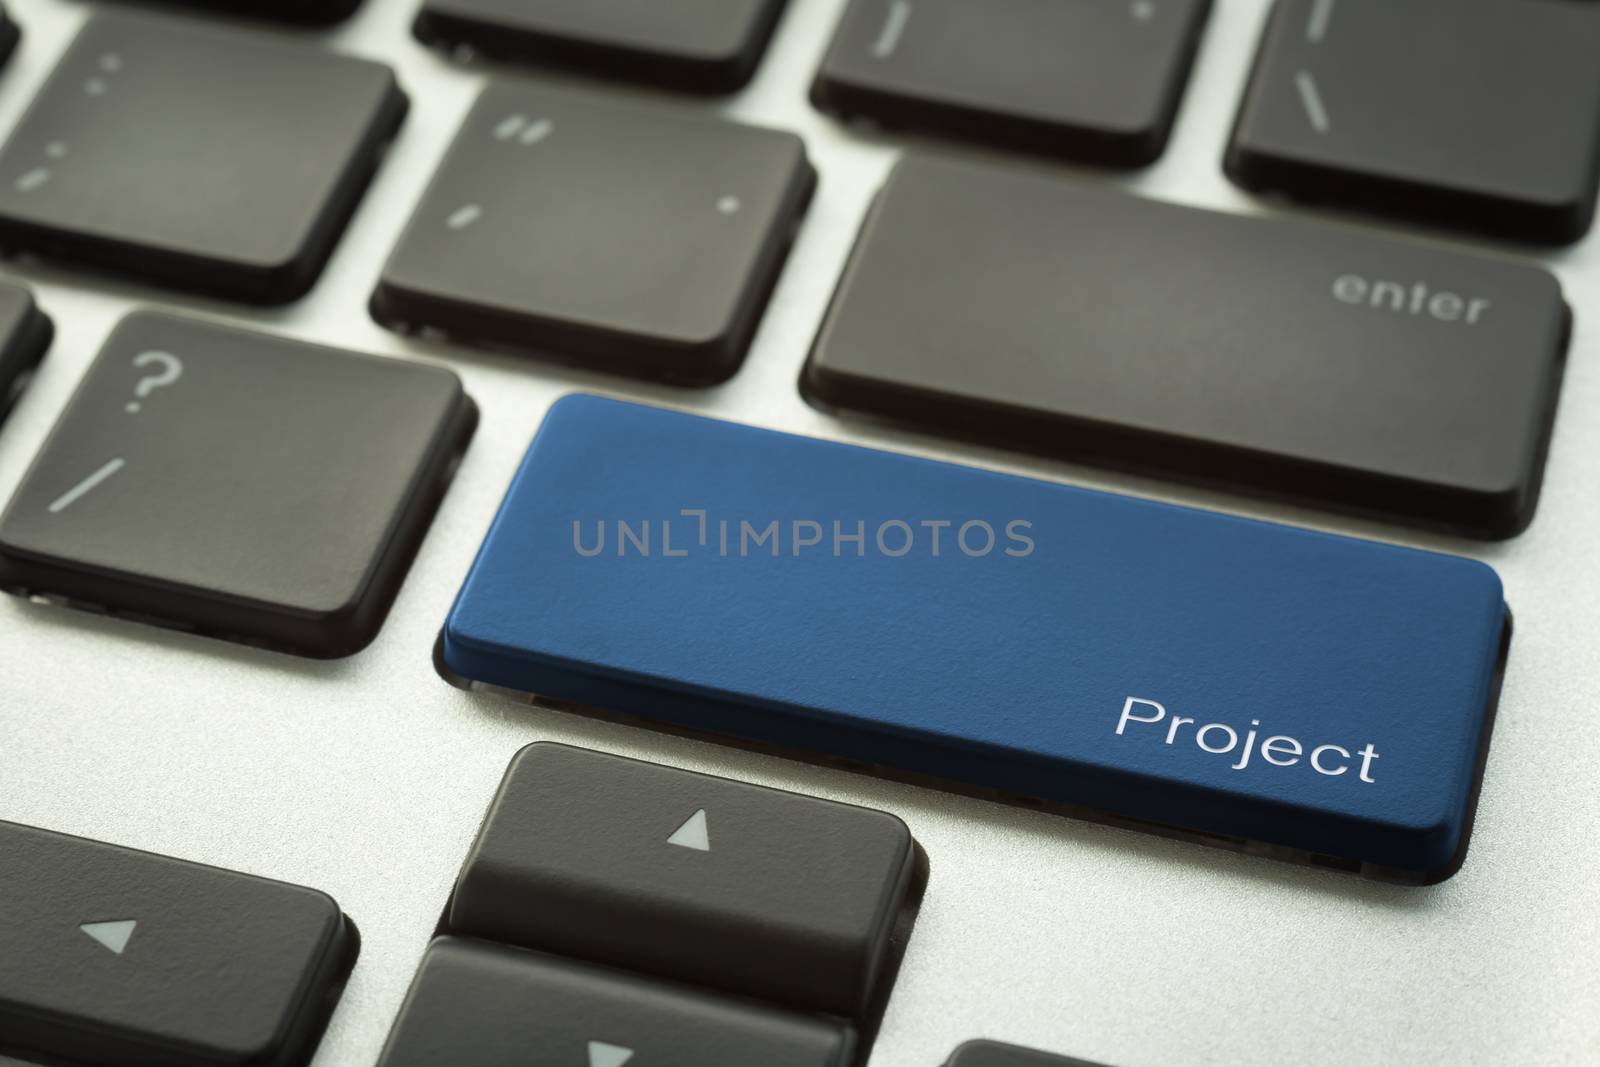 Laptop keyboard with typographic PROJECT button by vinnstock